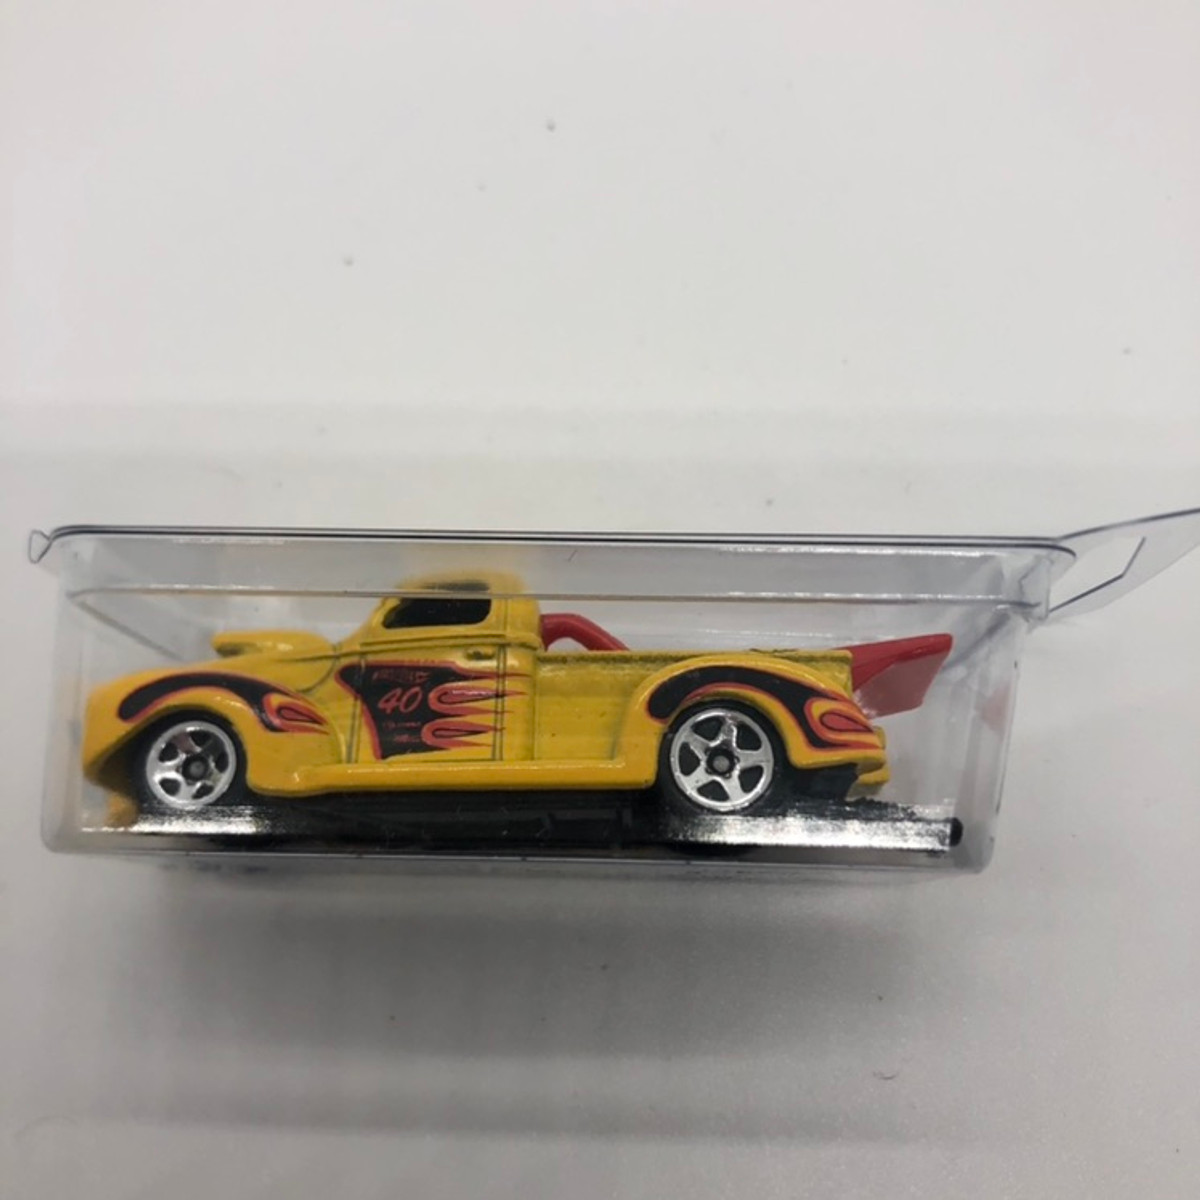 Hot wheels 40 Ford Pickup Yellow Version Loose Mint